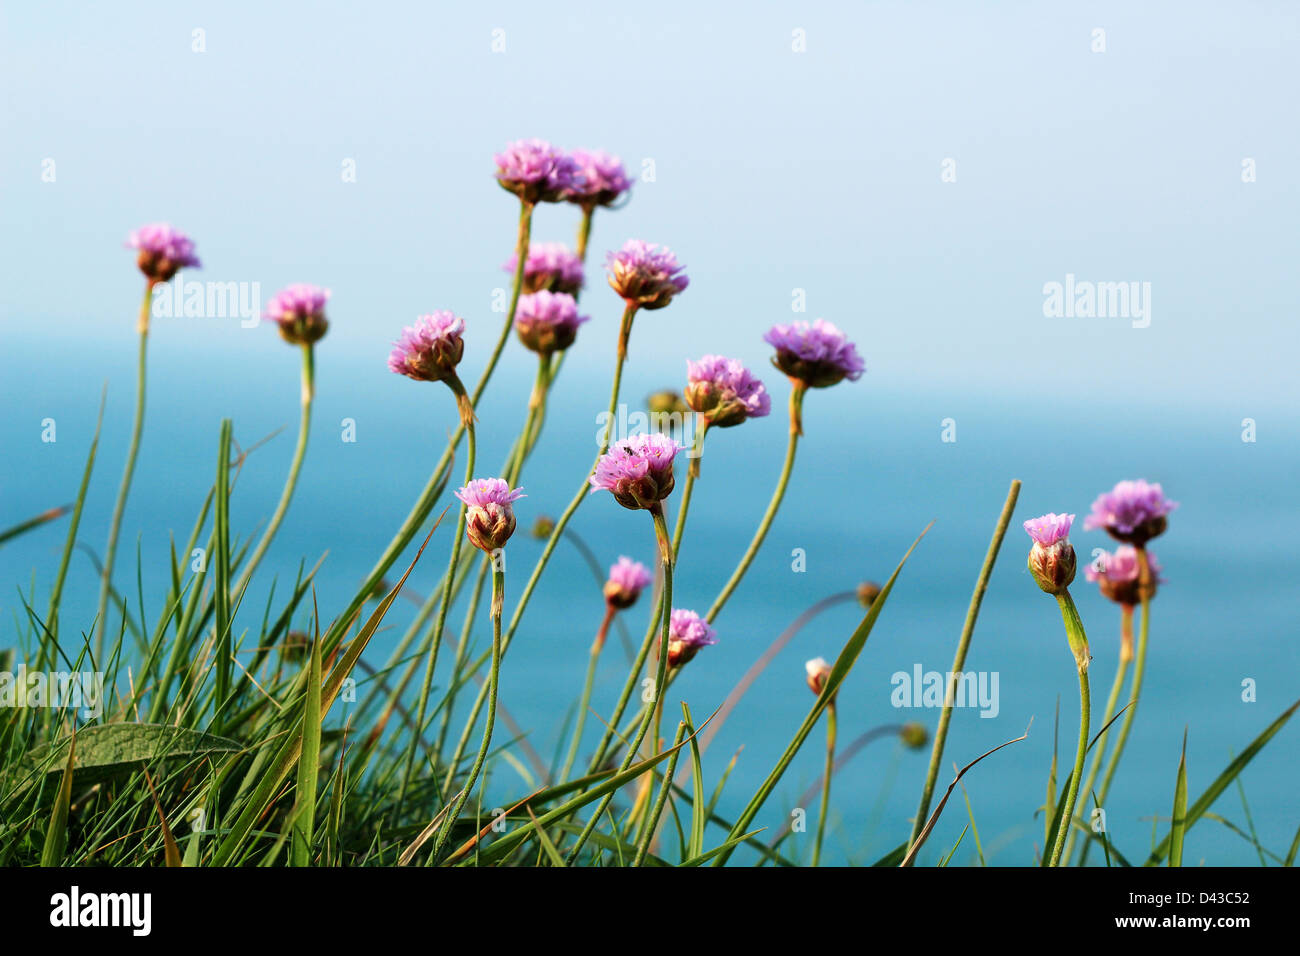 Armeria maritima against blurred sea background. rmeria pungens or Spiny Thrift is a small shrub growing in coastal sand-dunes. Stock Photo